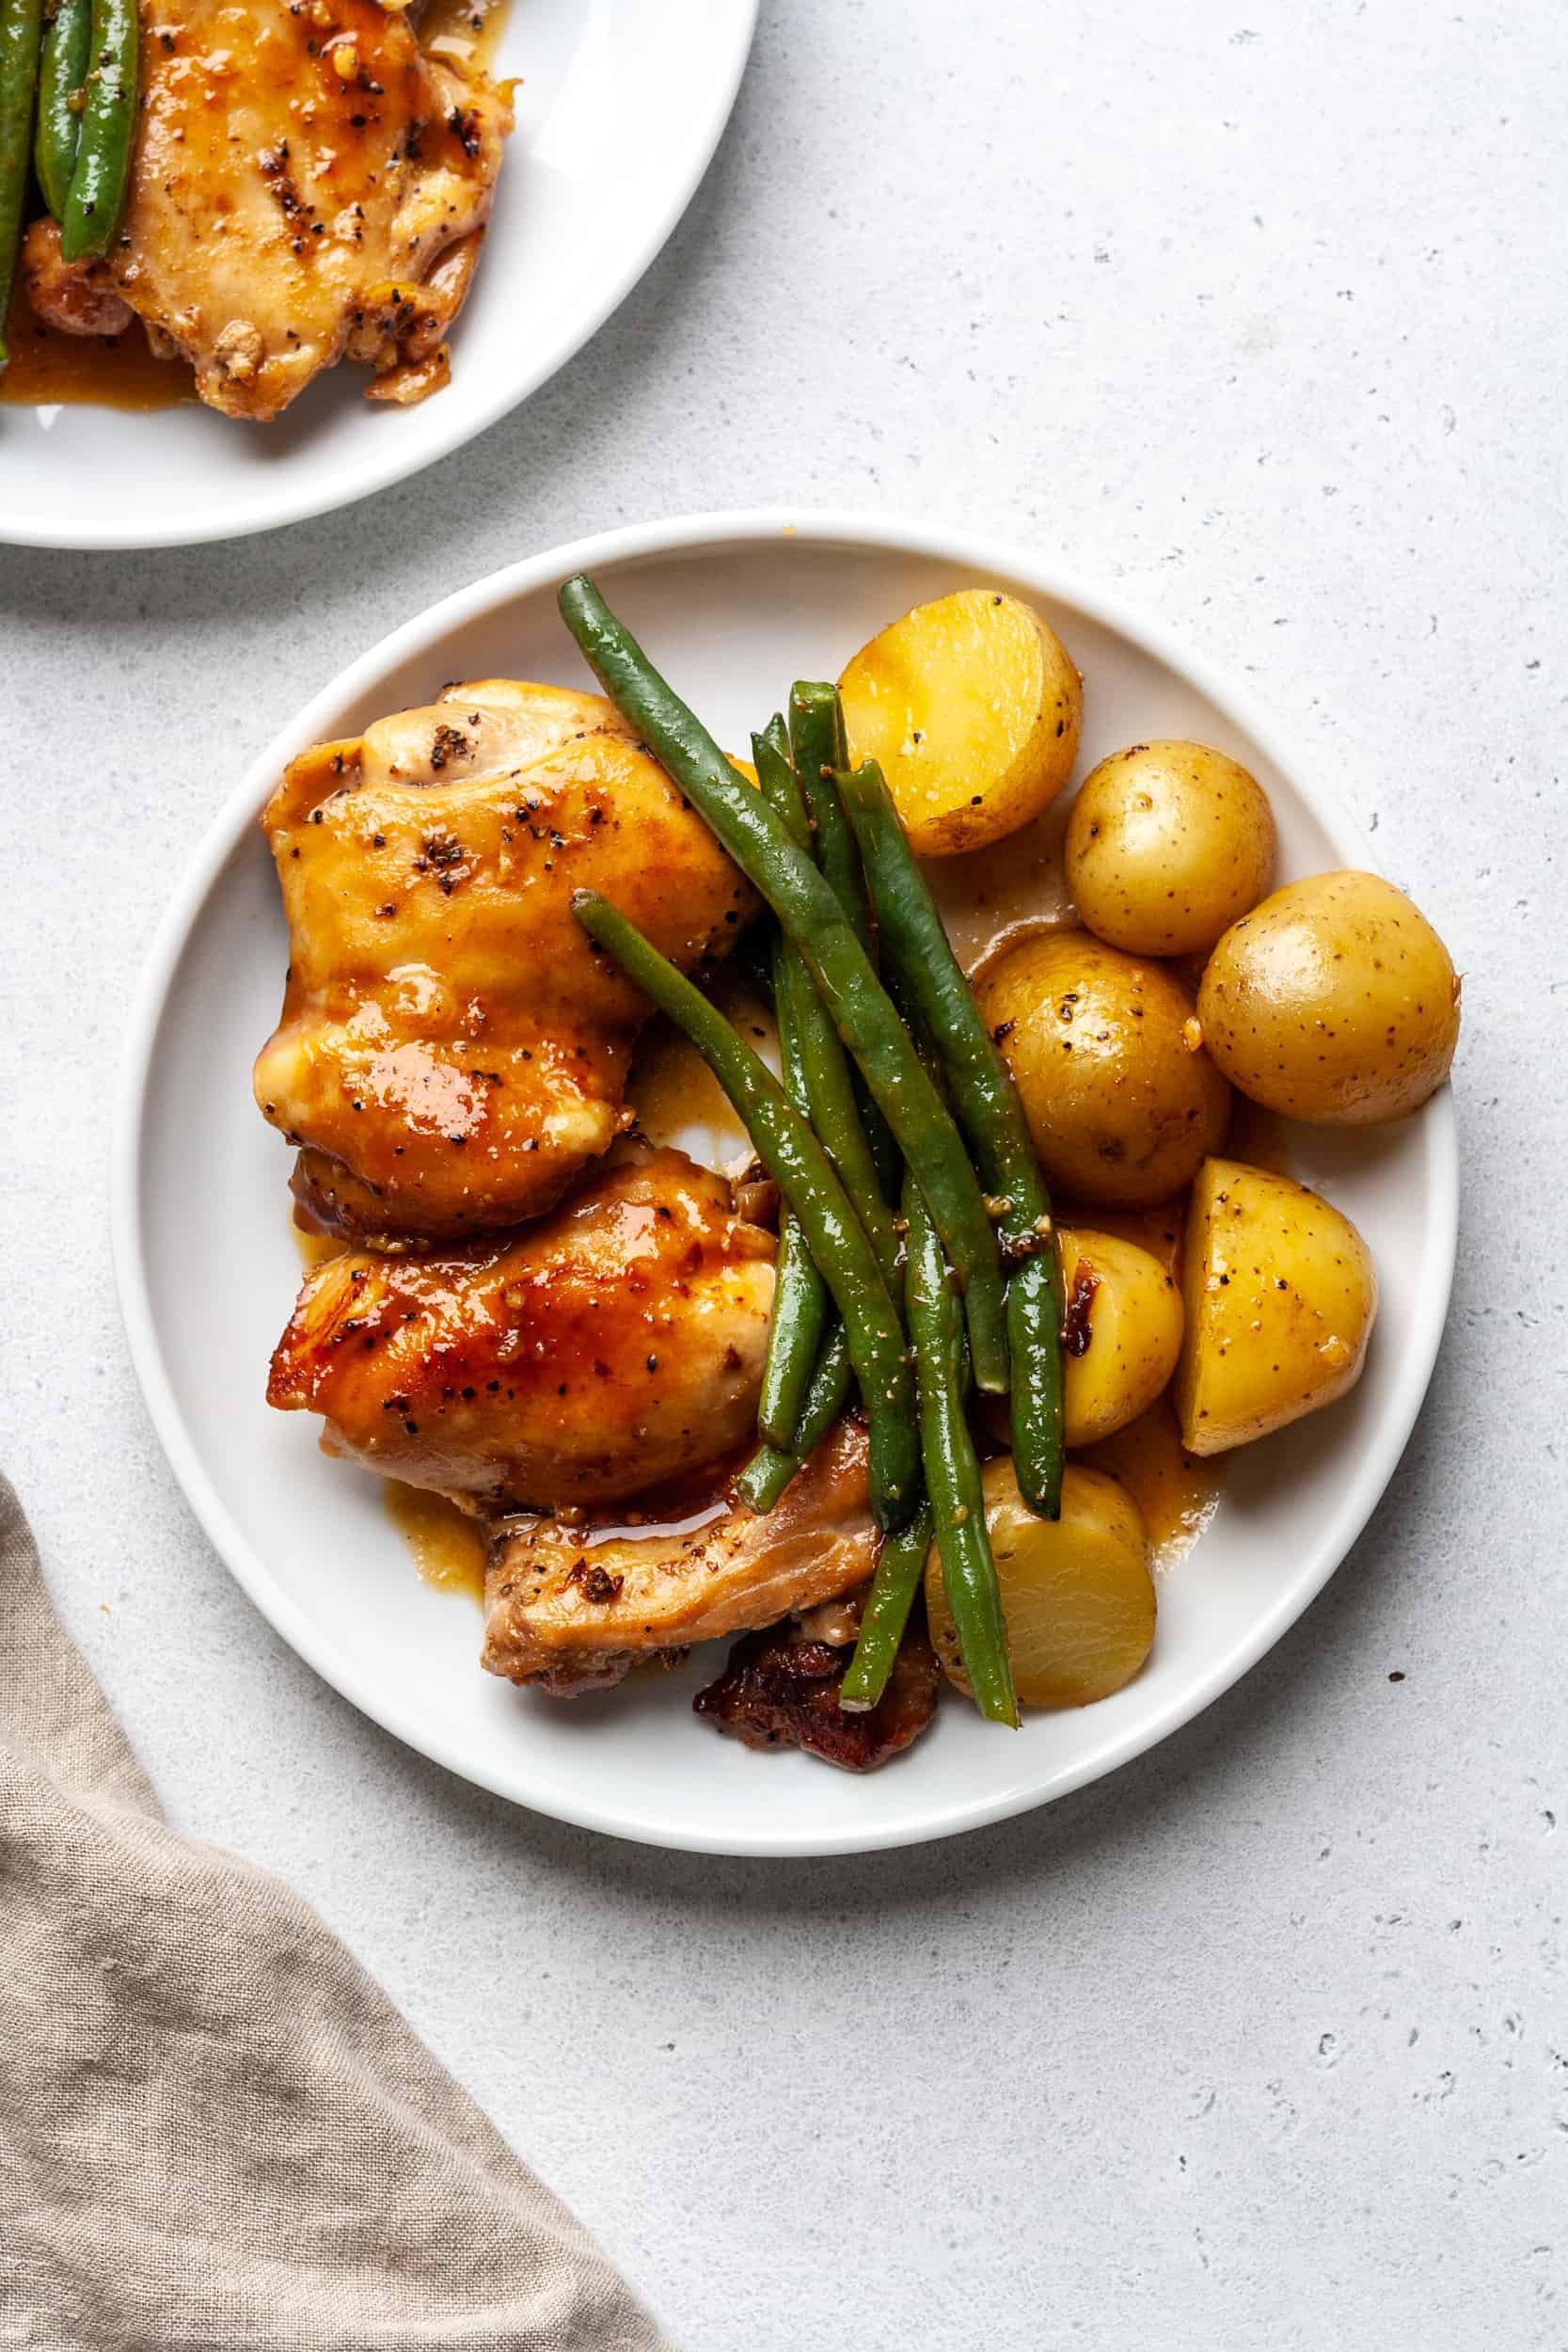 Plate of chicken thighs, green beans, and potatoes.